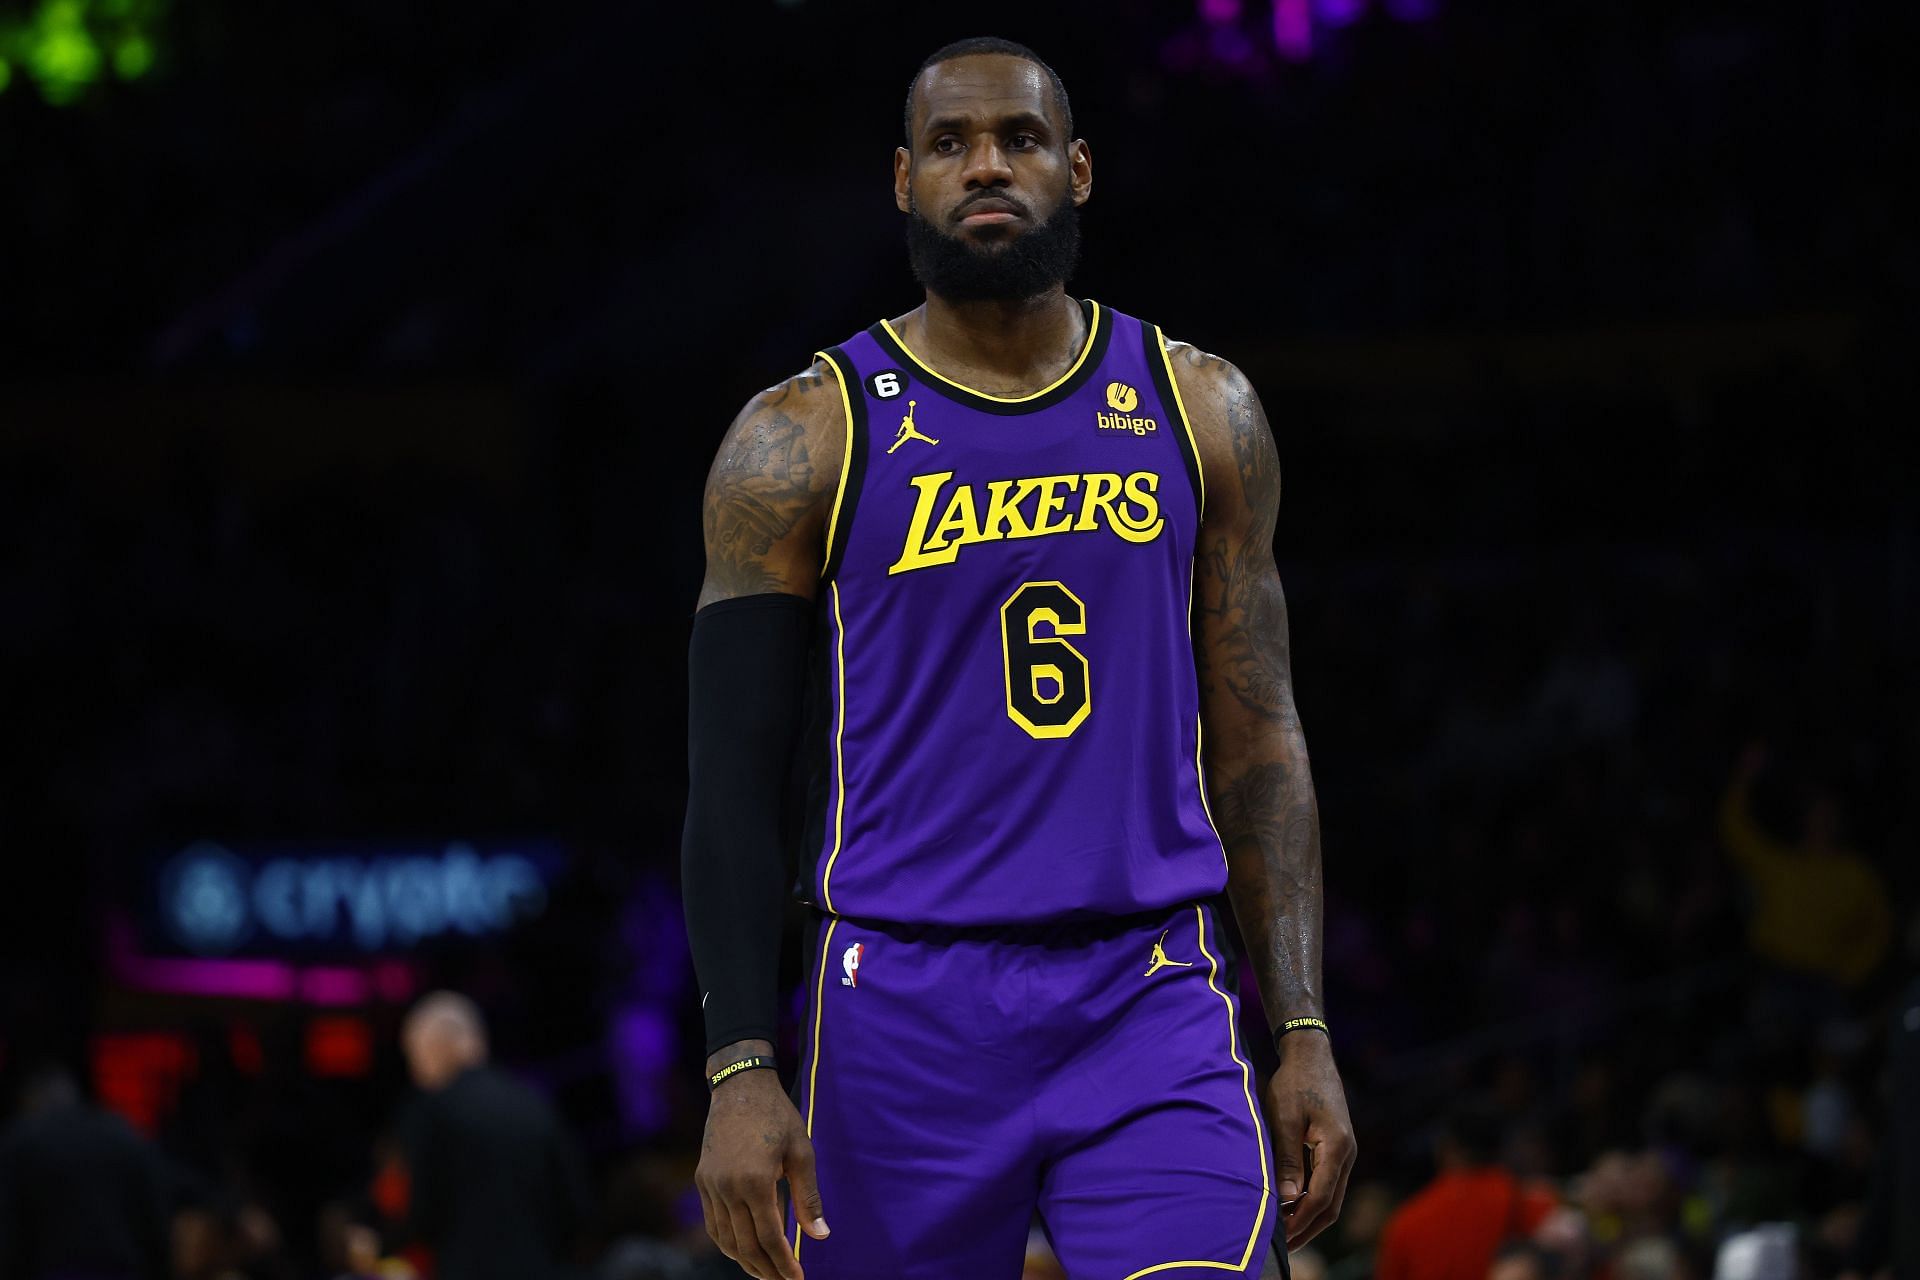 Thomas Bryant recalls being awestruck in 'surreal' first meeting with  LeBron James during Lakers-Wizards game - Lakers Daily